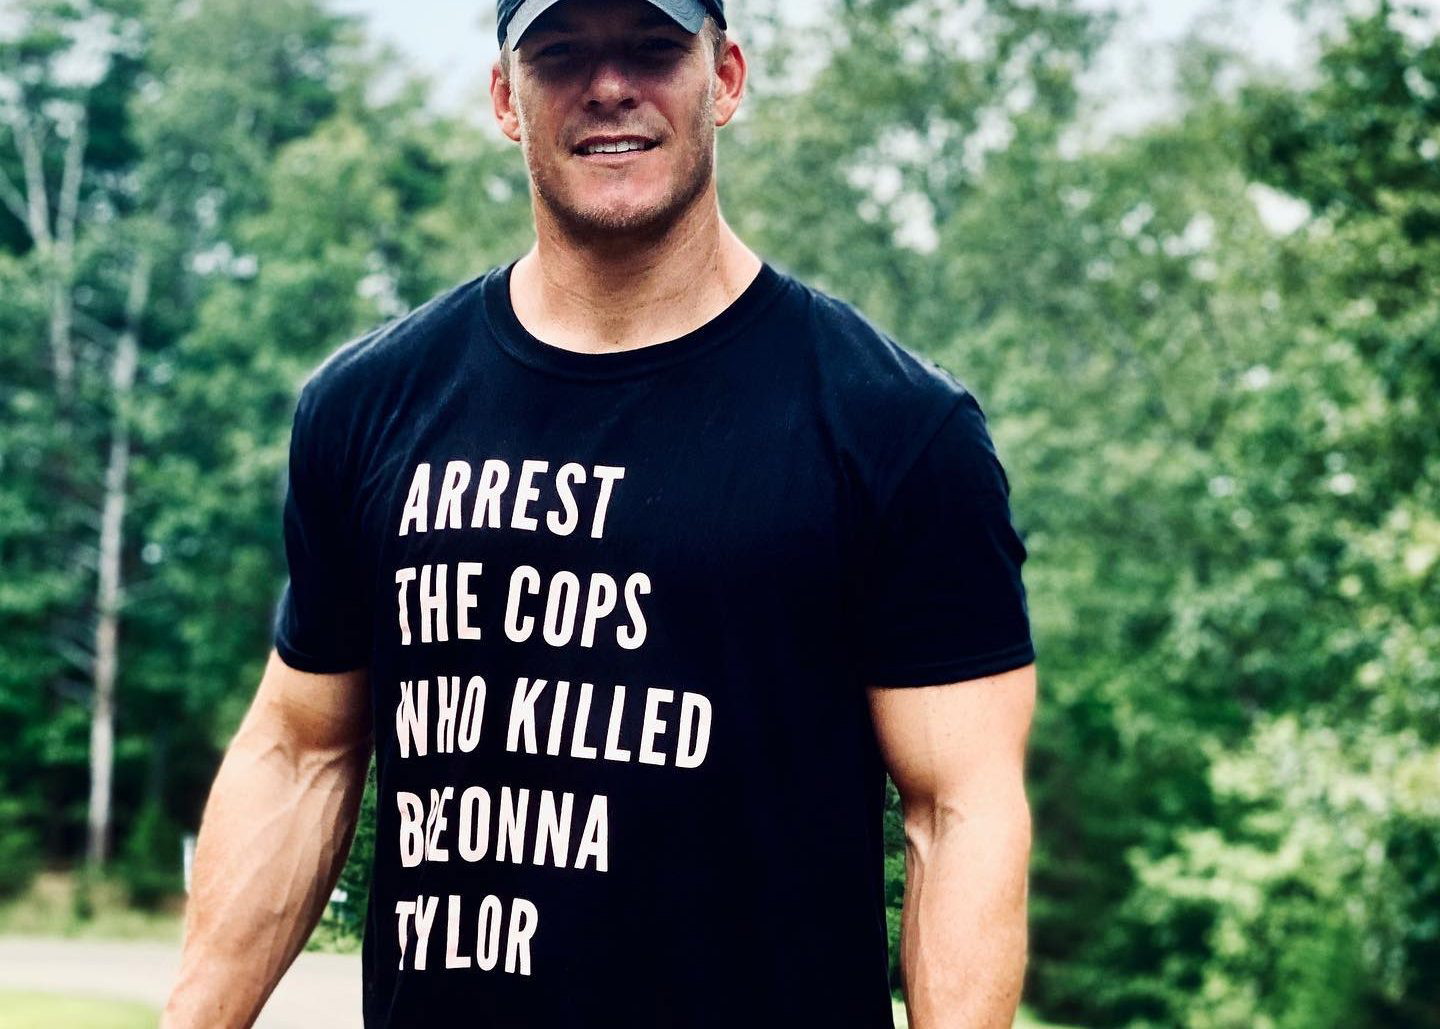 Alan Ritchson from 2020